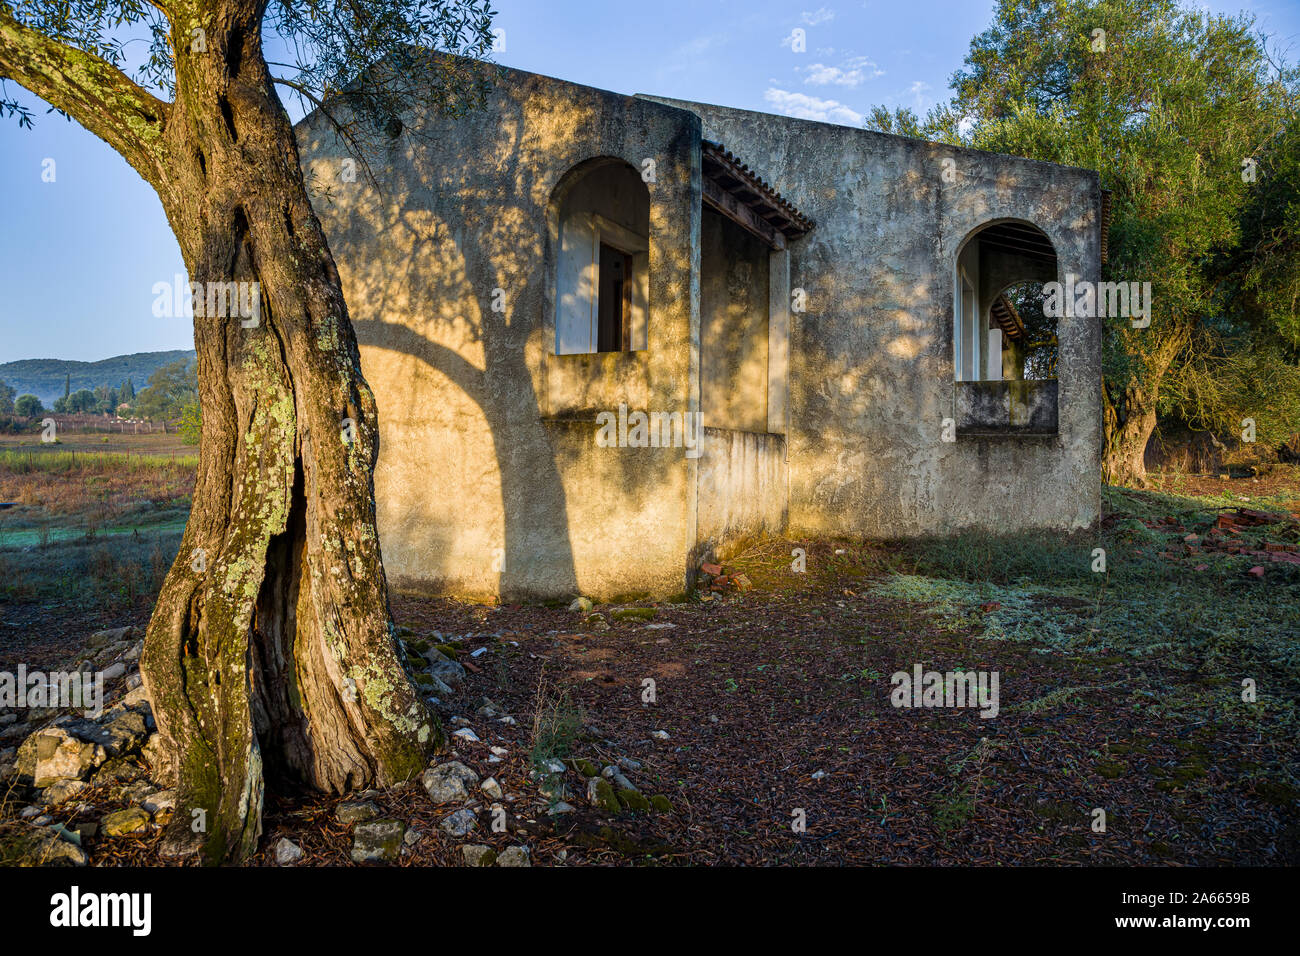 Early morning at an abandoned house on Corfu island in the Ionian Sea, Greece Stock Photo